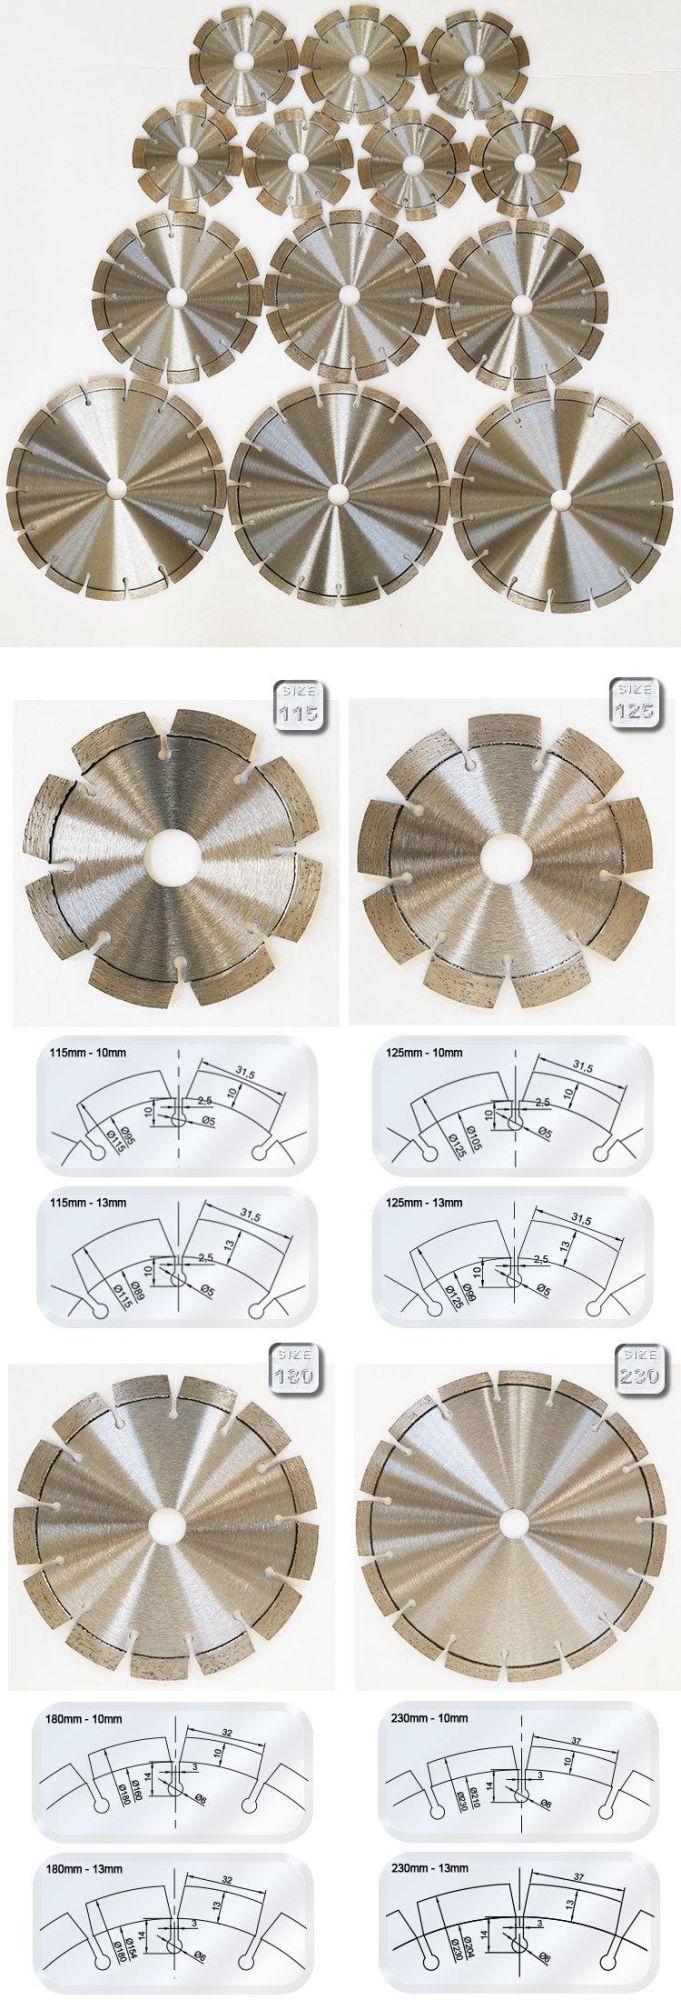 115mm Laser Welded Segmented Diamond Tools Cutting Saw Blade for Reinforced-Concrete